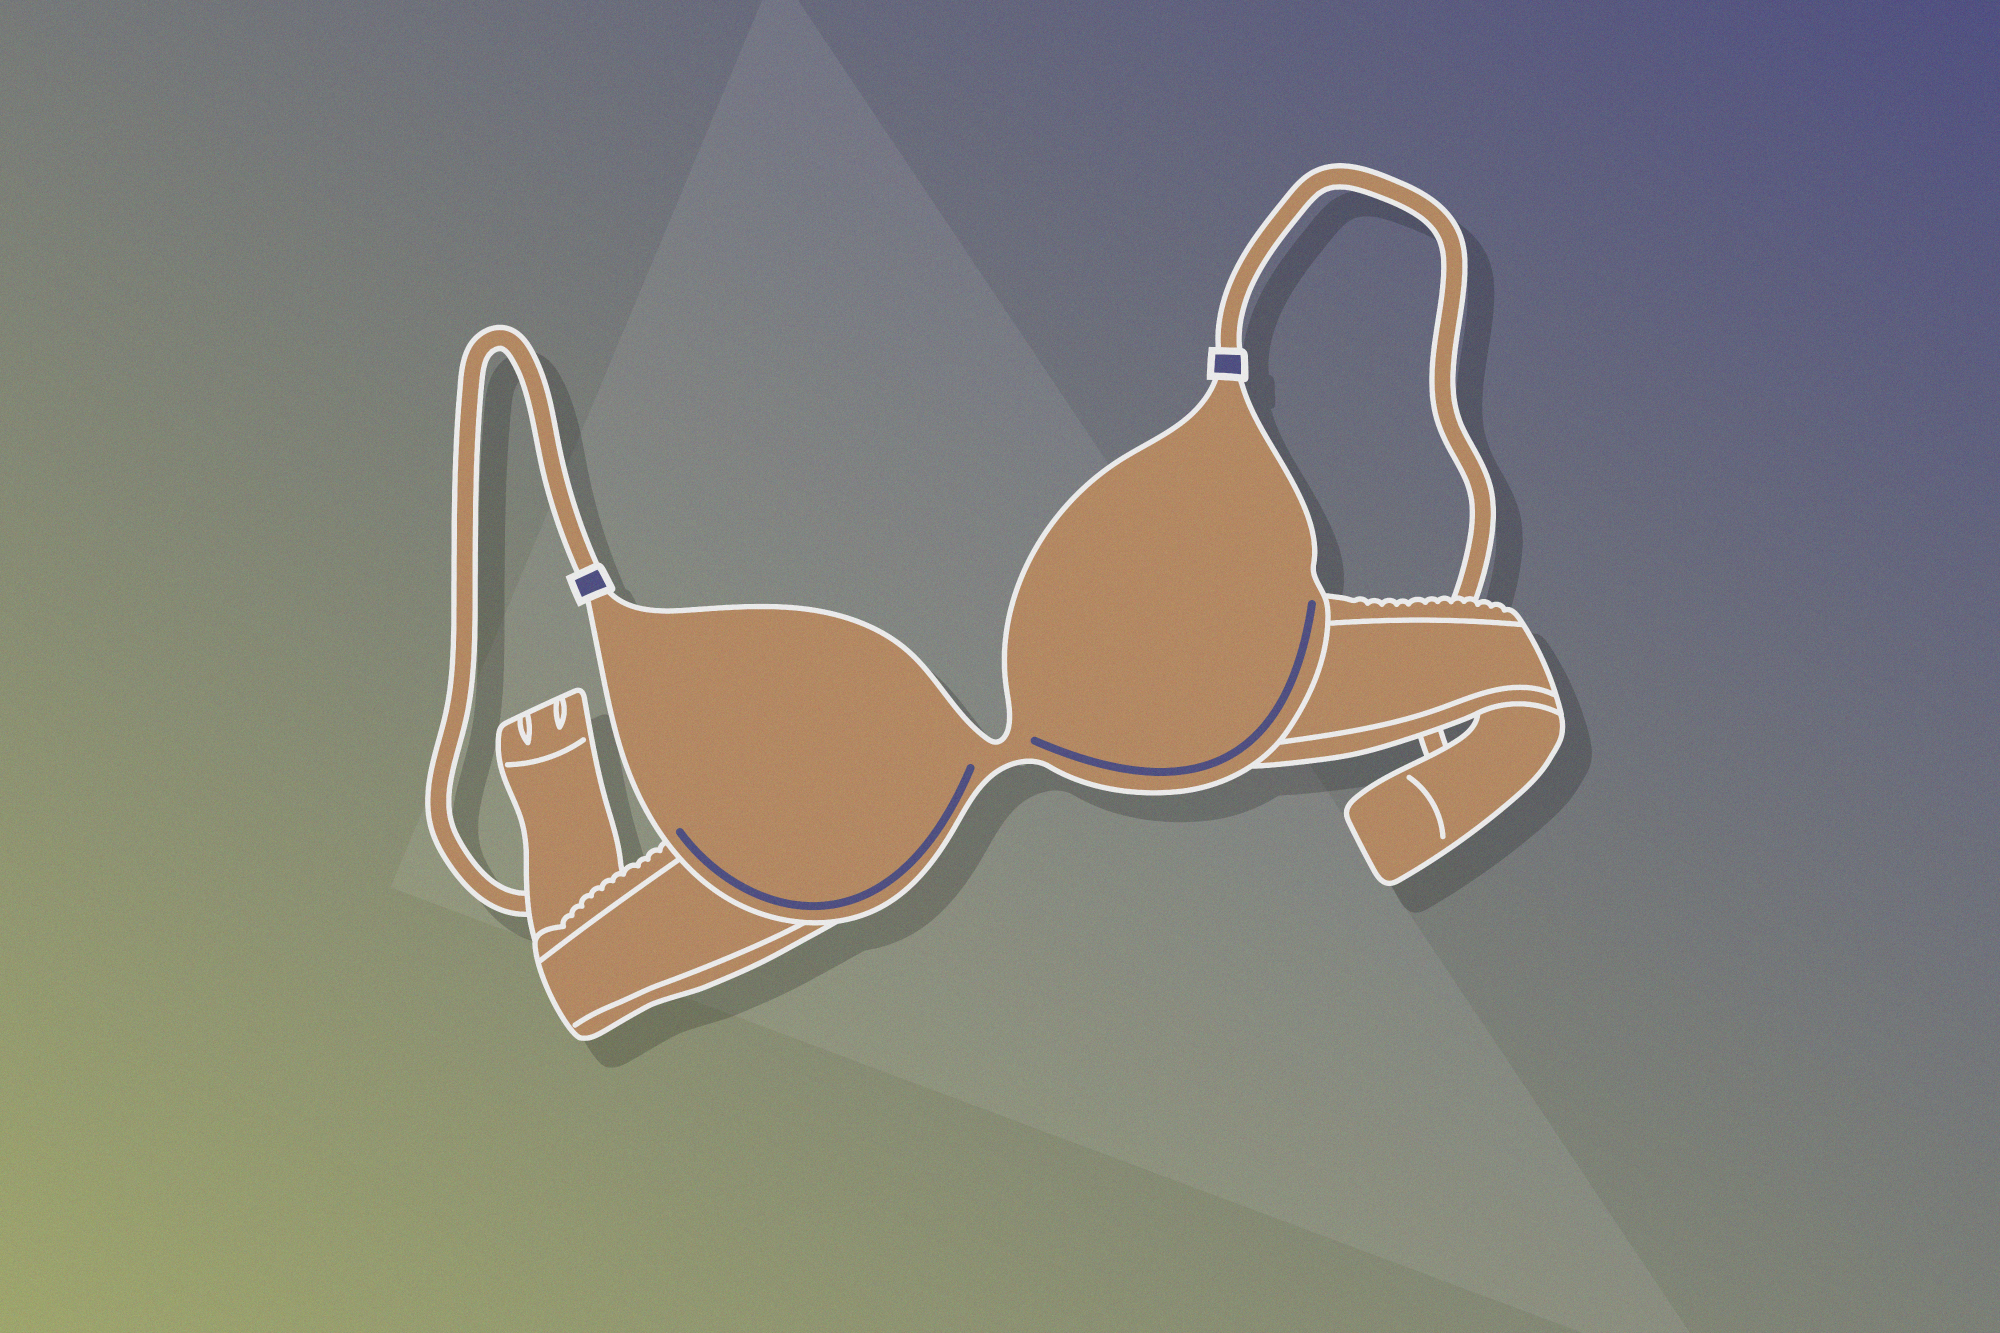 Disadvantages of Wearing Bra: 4 Ways Your Bra is SERIOUSLY